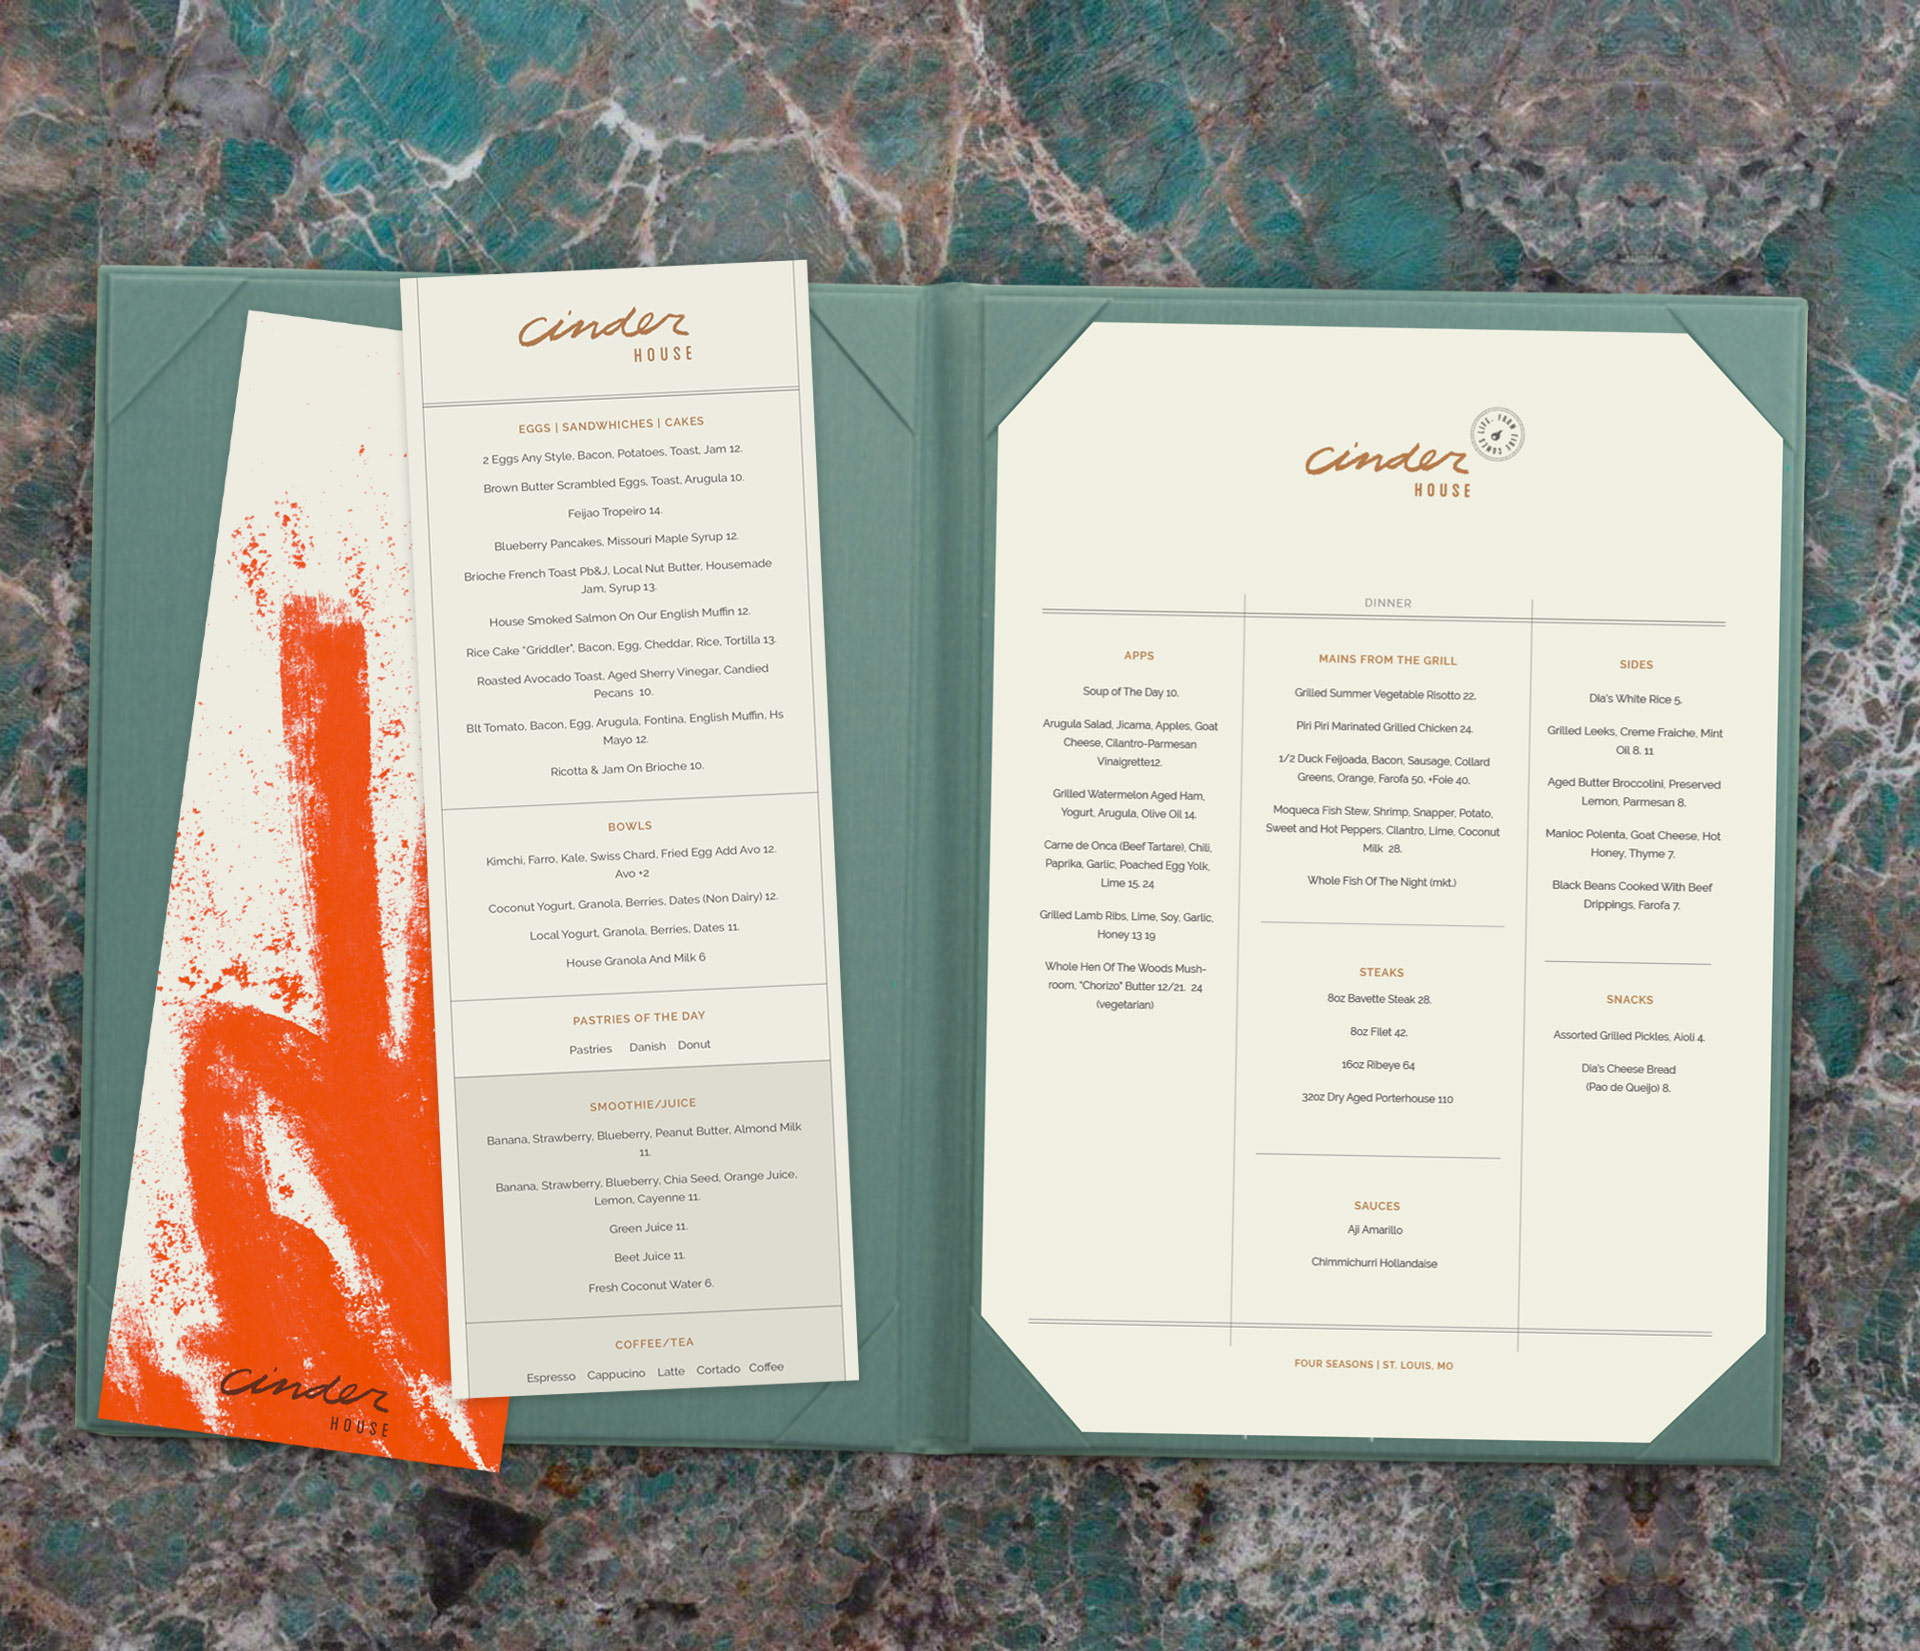 The menu design for Cinder House in a leather binder